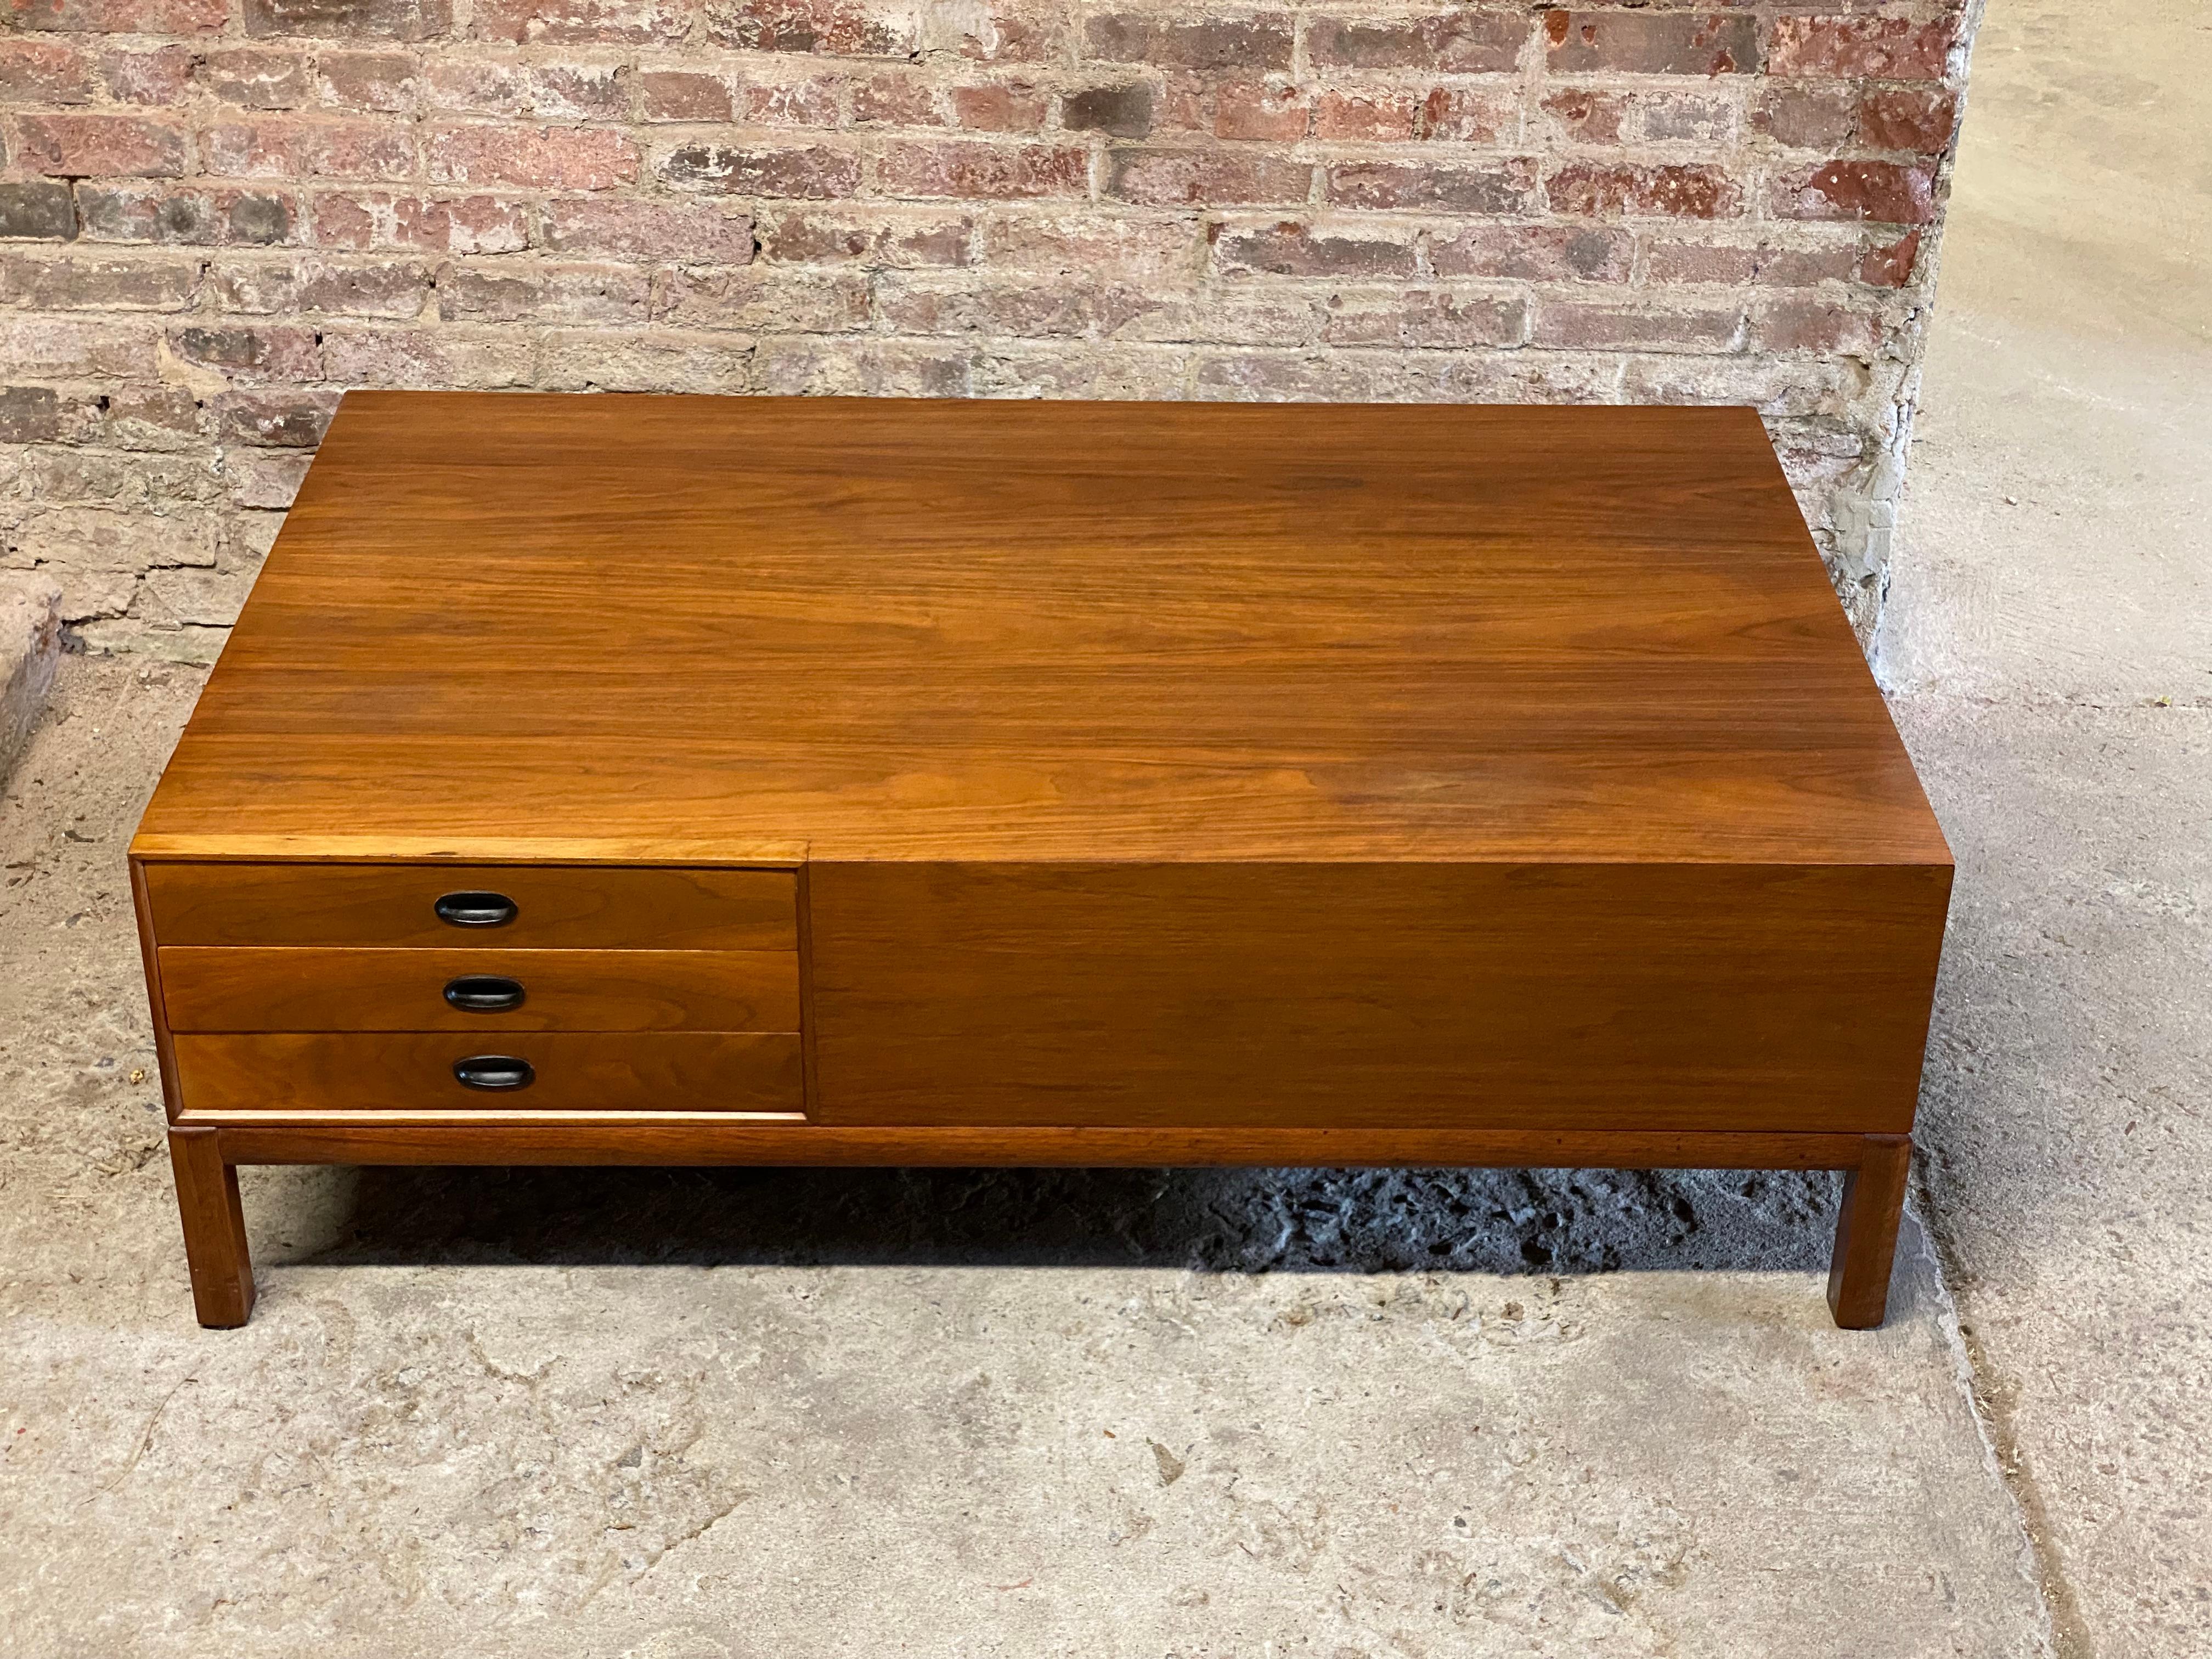 Massive rectangular block front Mid-Century Modern coffee table. Possibly an early Glenn of California design by Milo Baughman or Richard Thompson. The simplicity and quality are surely present in this impressive coffee table. Beautifully figured